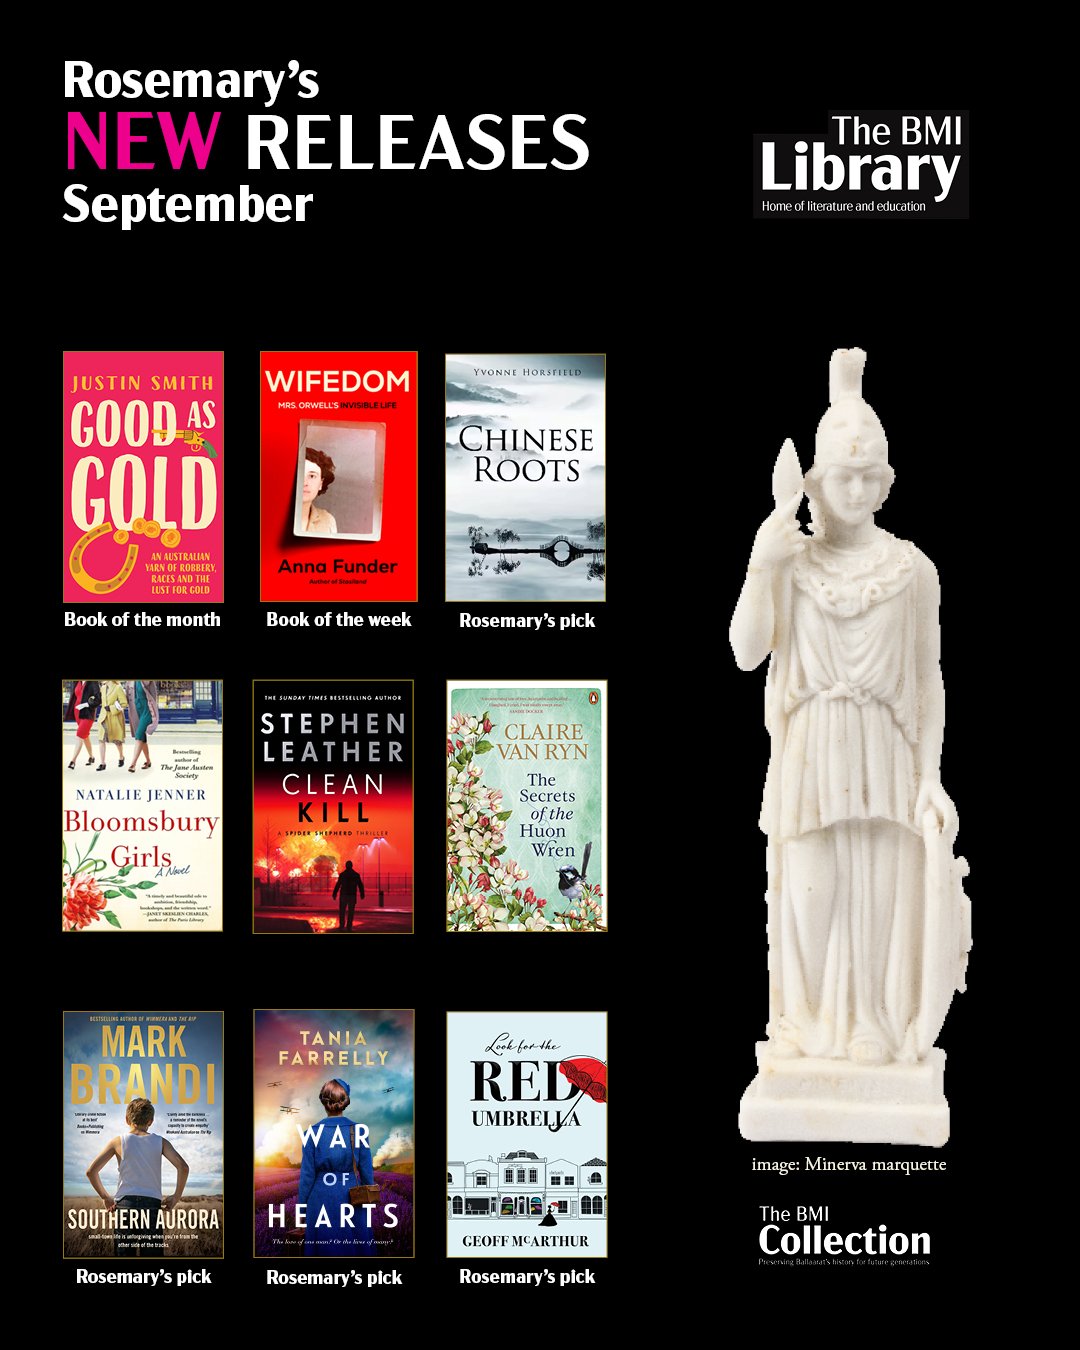 Book covers on black background with a statuette of Minerva